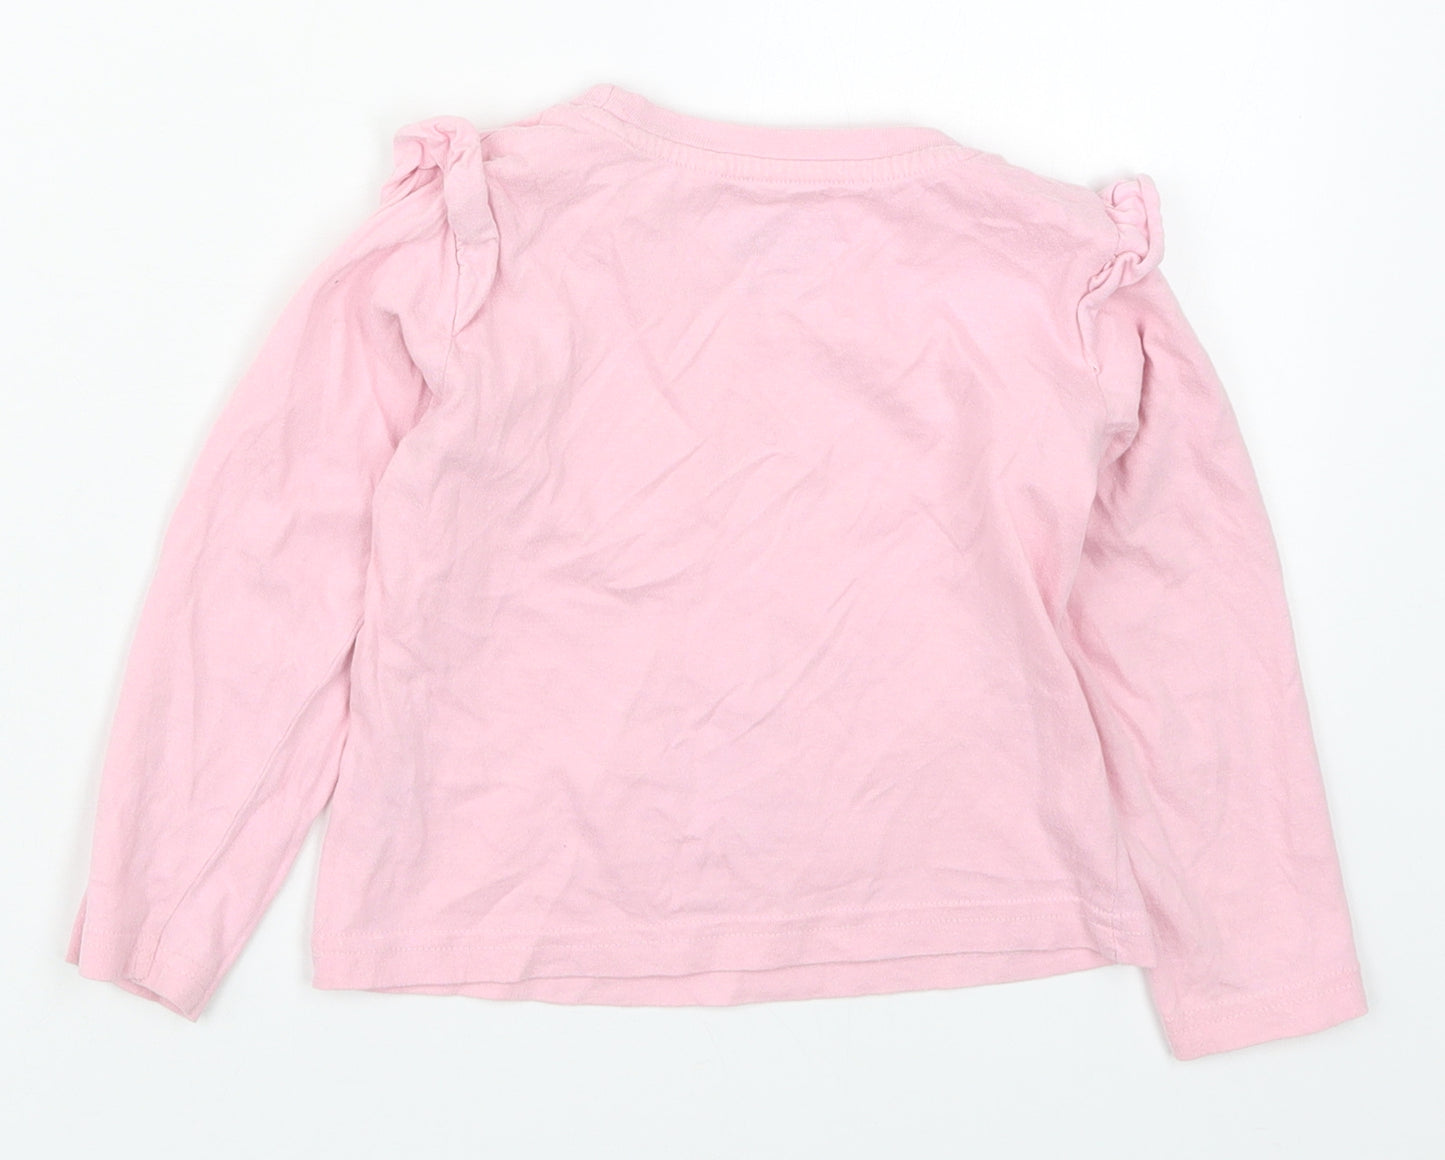 Preworn Girls Pink Solid Cotton Top Pyjama Top Size 2-3 Years  Pullover - Peppa Pig Dreaming of Dancing